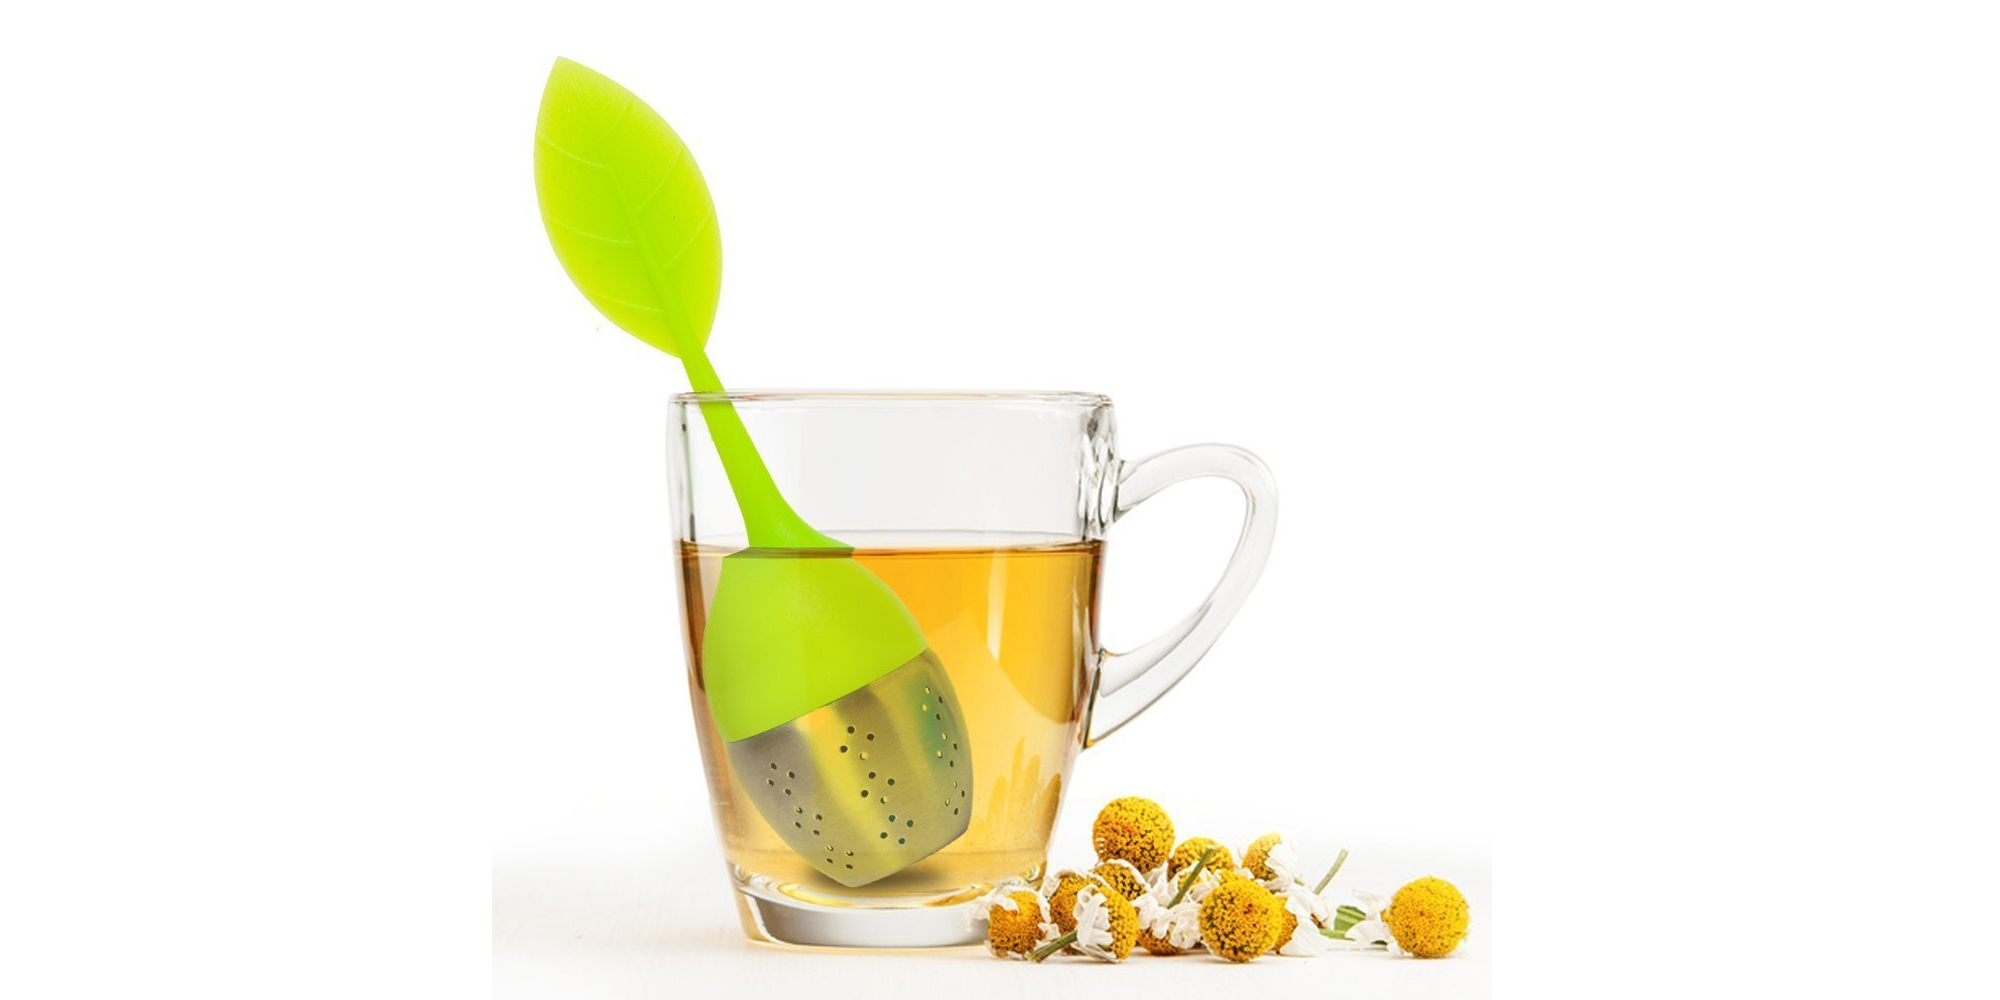 Set of 2 Silicone and Steel Tea Infusers Only $1.69 + FREE Shipping!